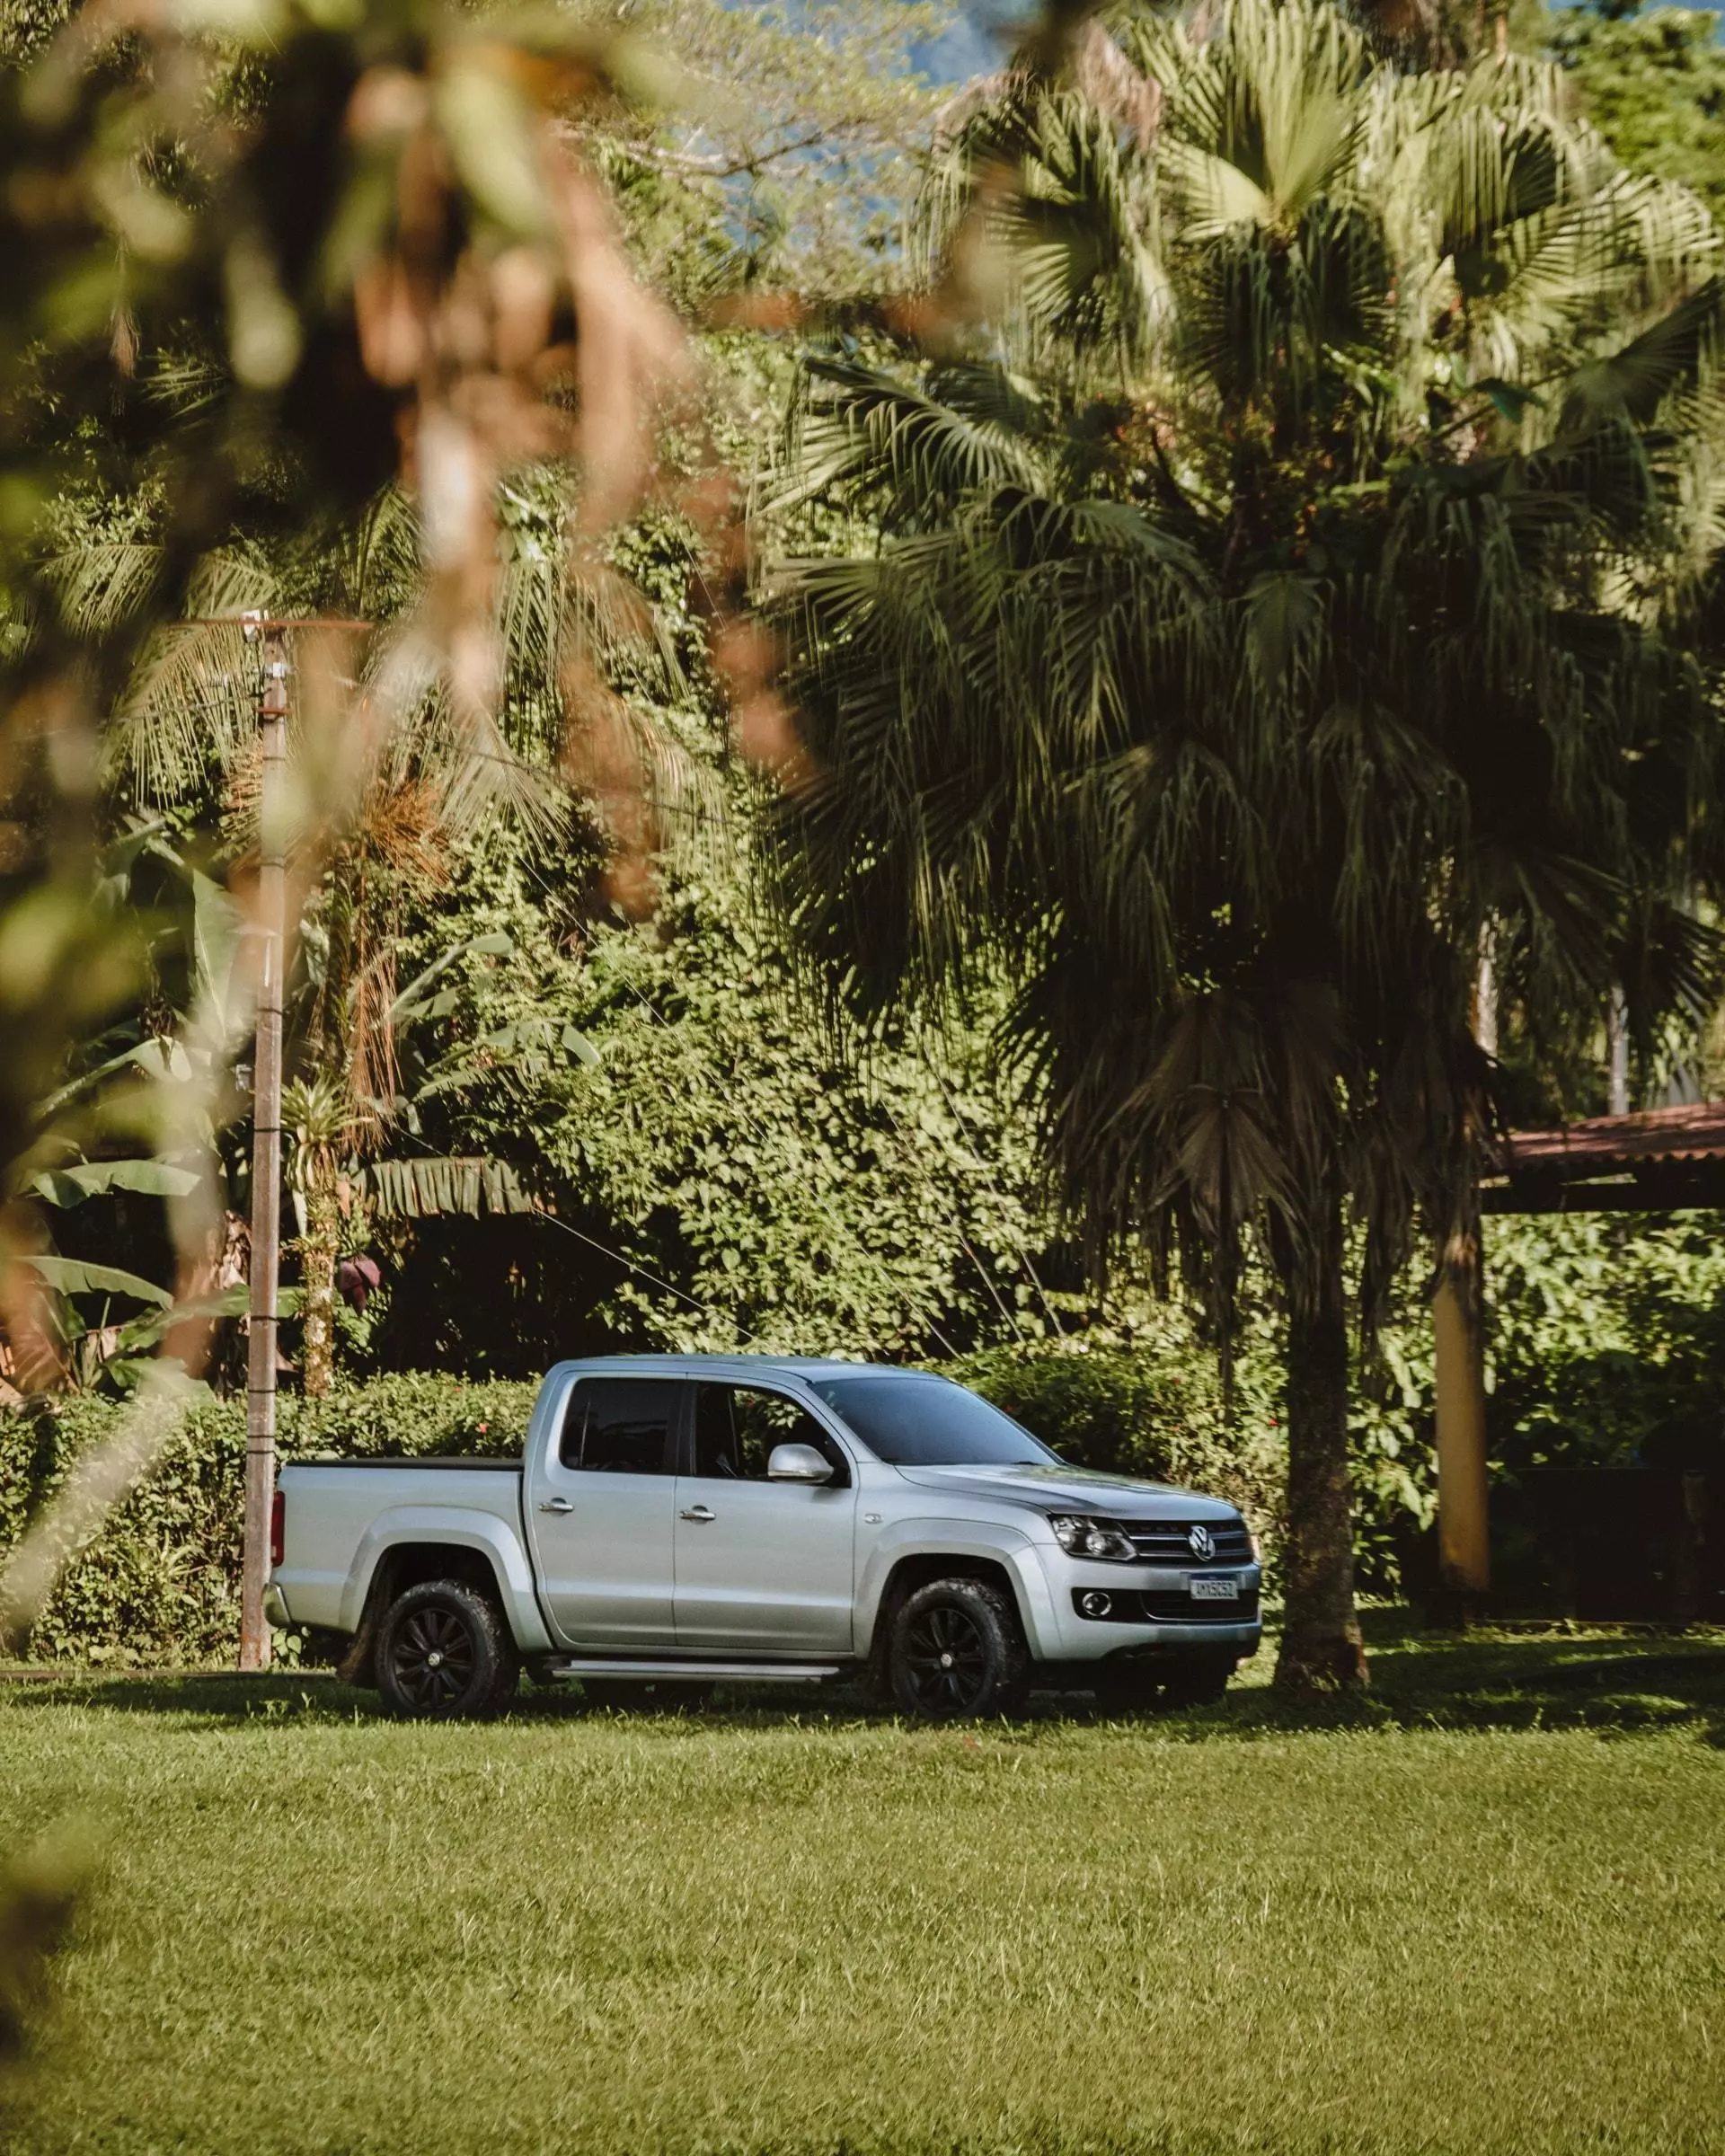 Volkswagen Amarok - What is the most reliable tow vehicle? 